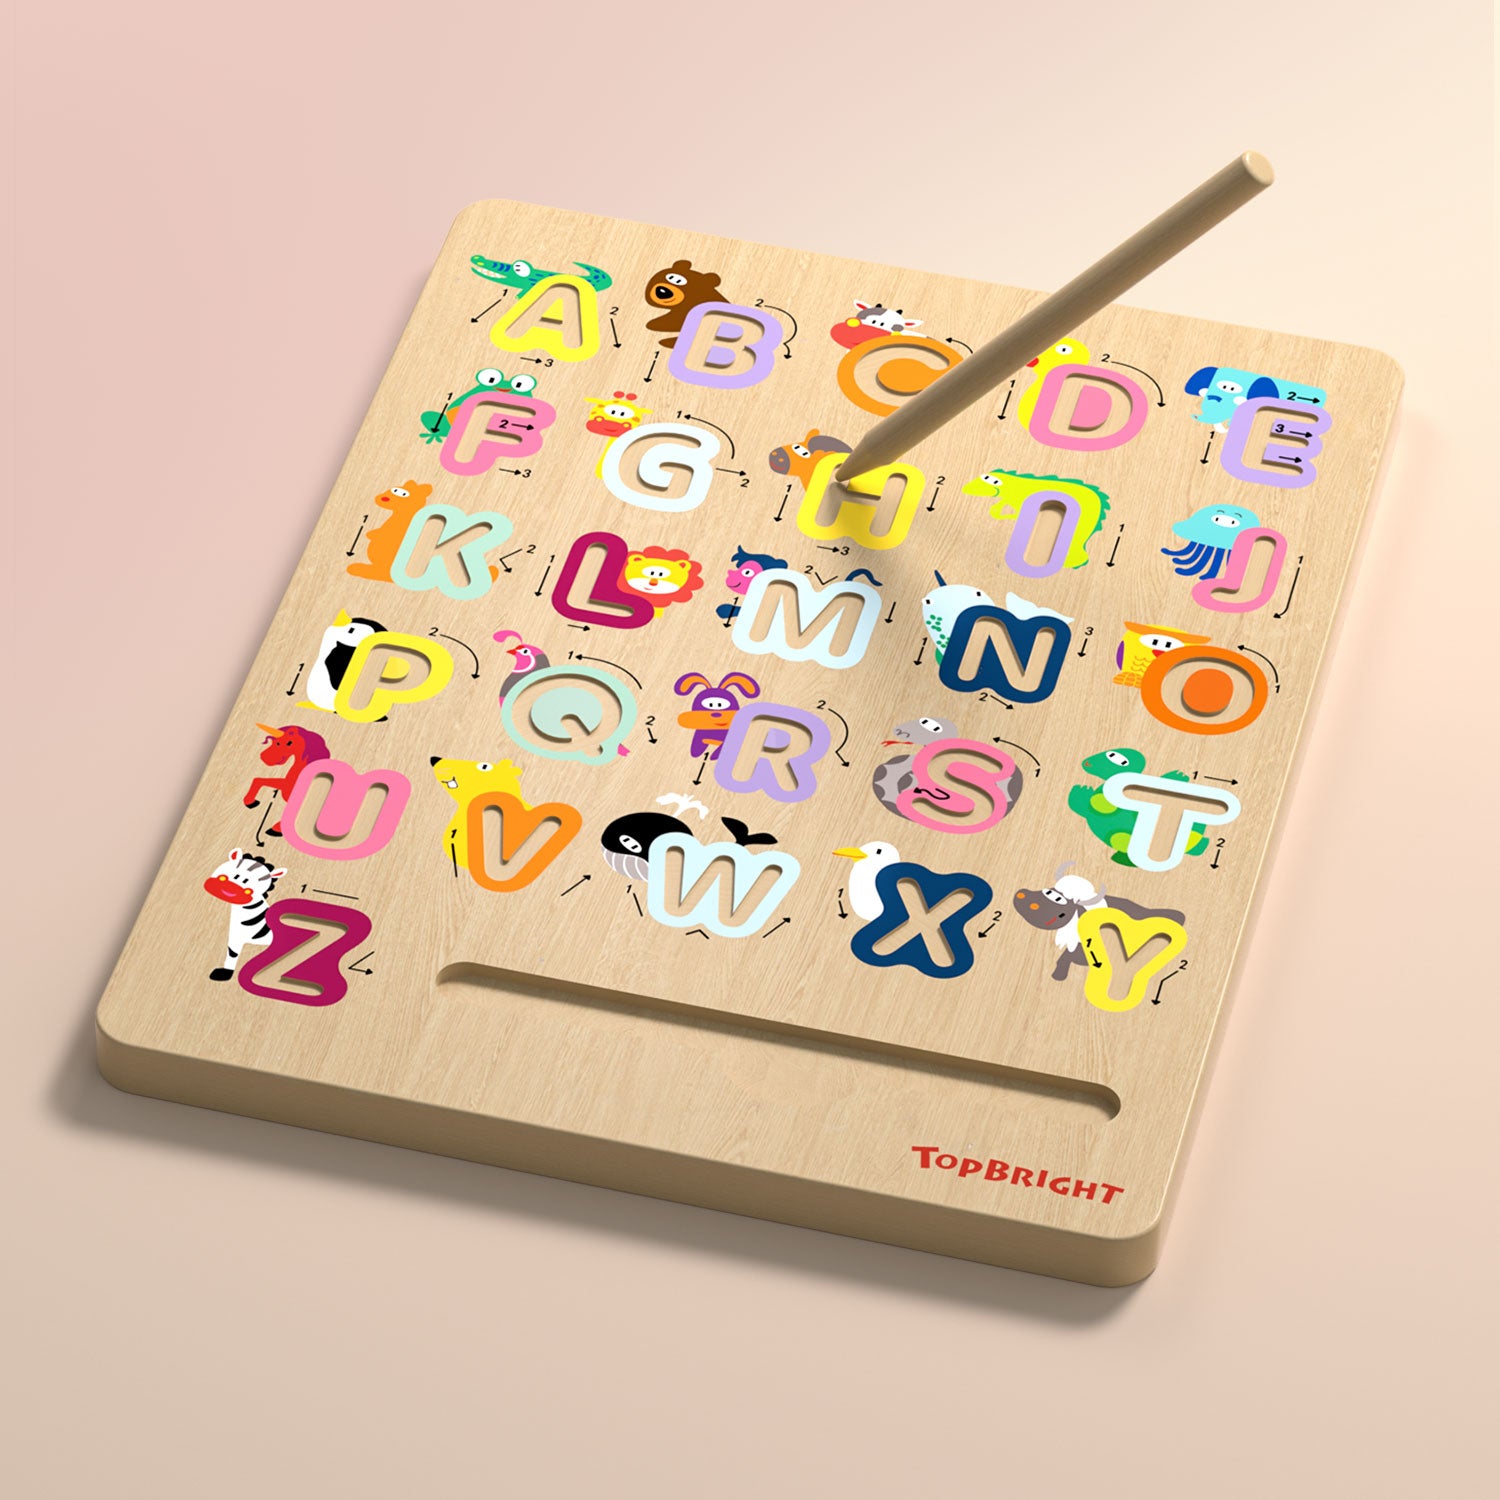 Montessori Alphabet Learning Toy: Perfect Writing Aid for Kids Aged 3-5 - Double the Learning with Double-Sided Design